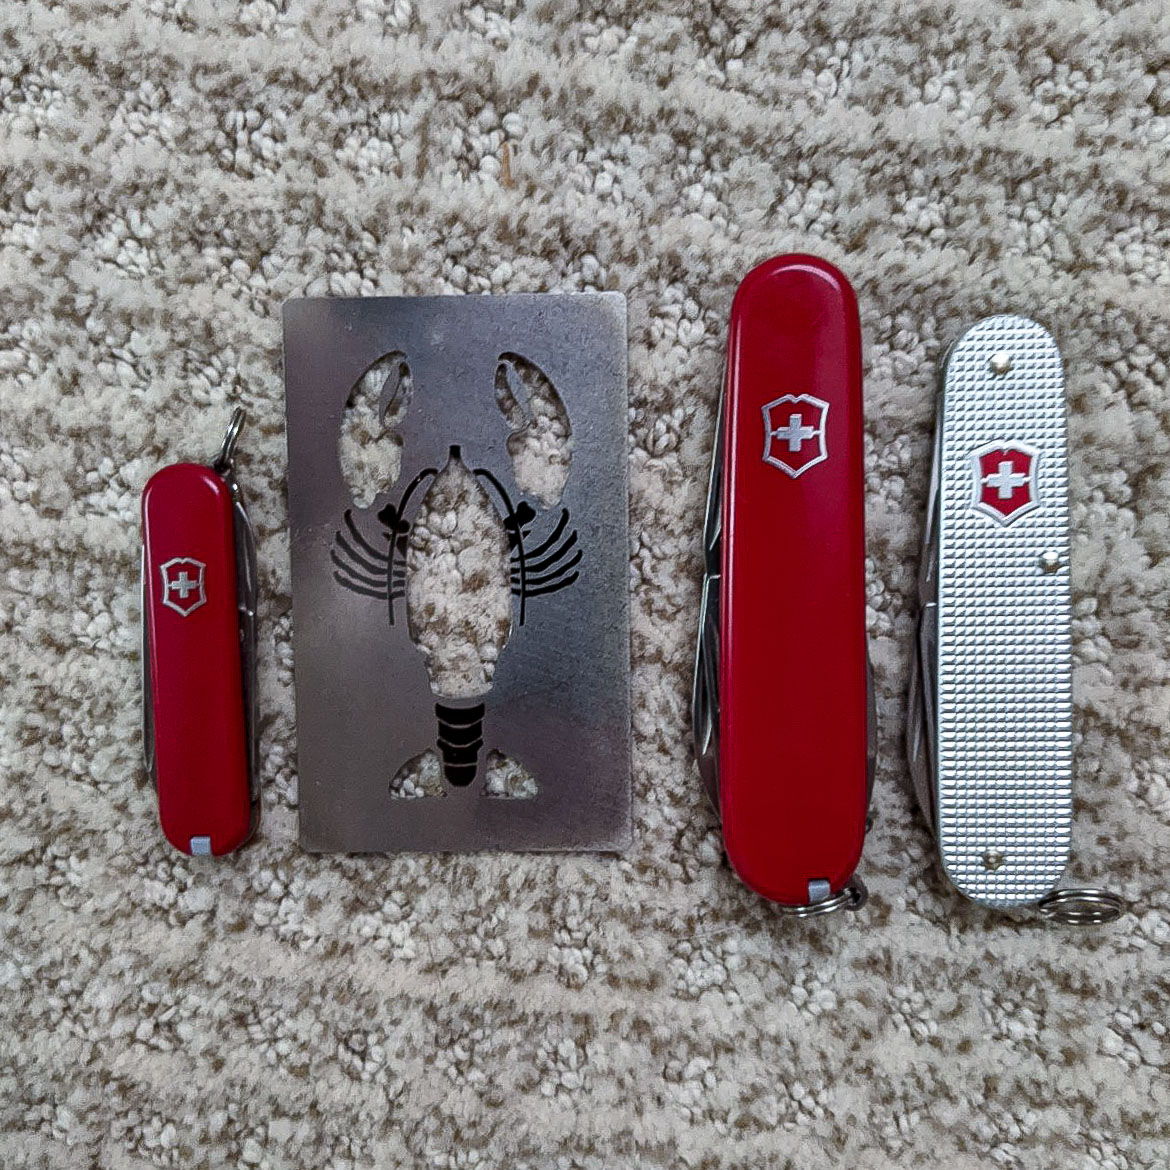 Swiss Army Knife collection